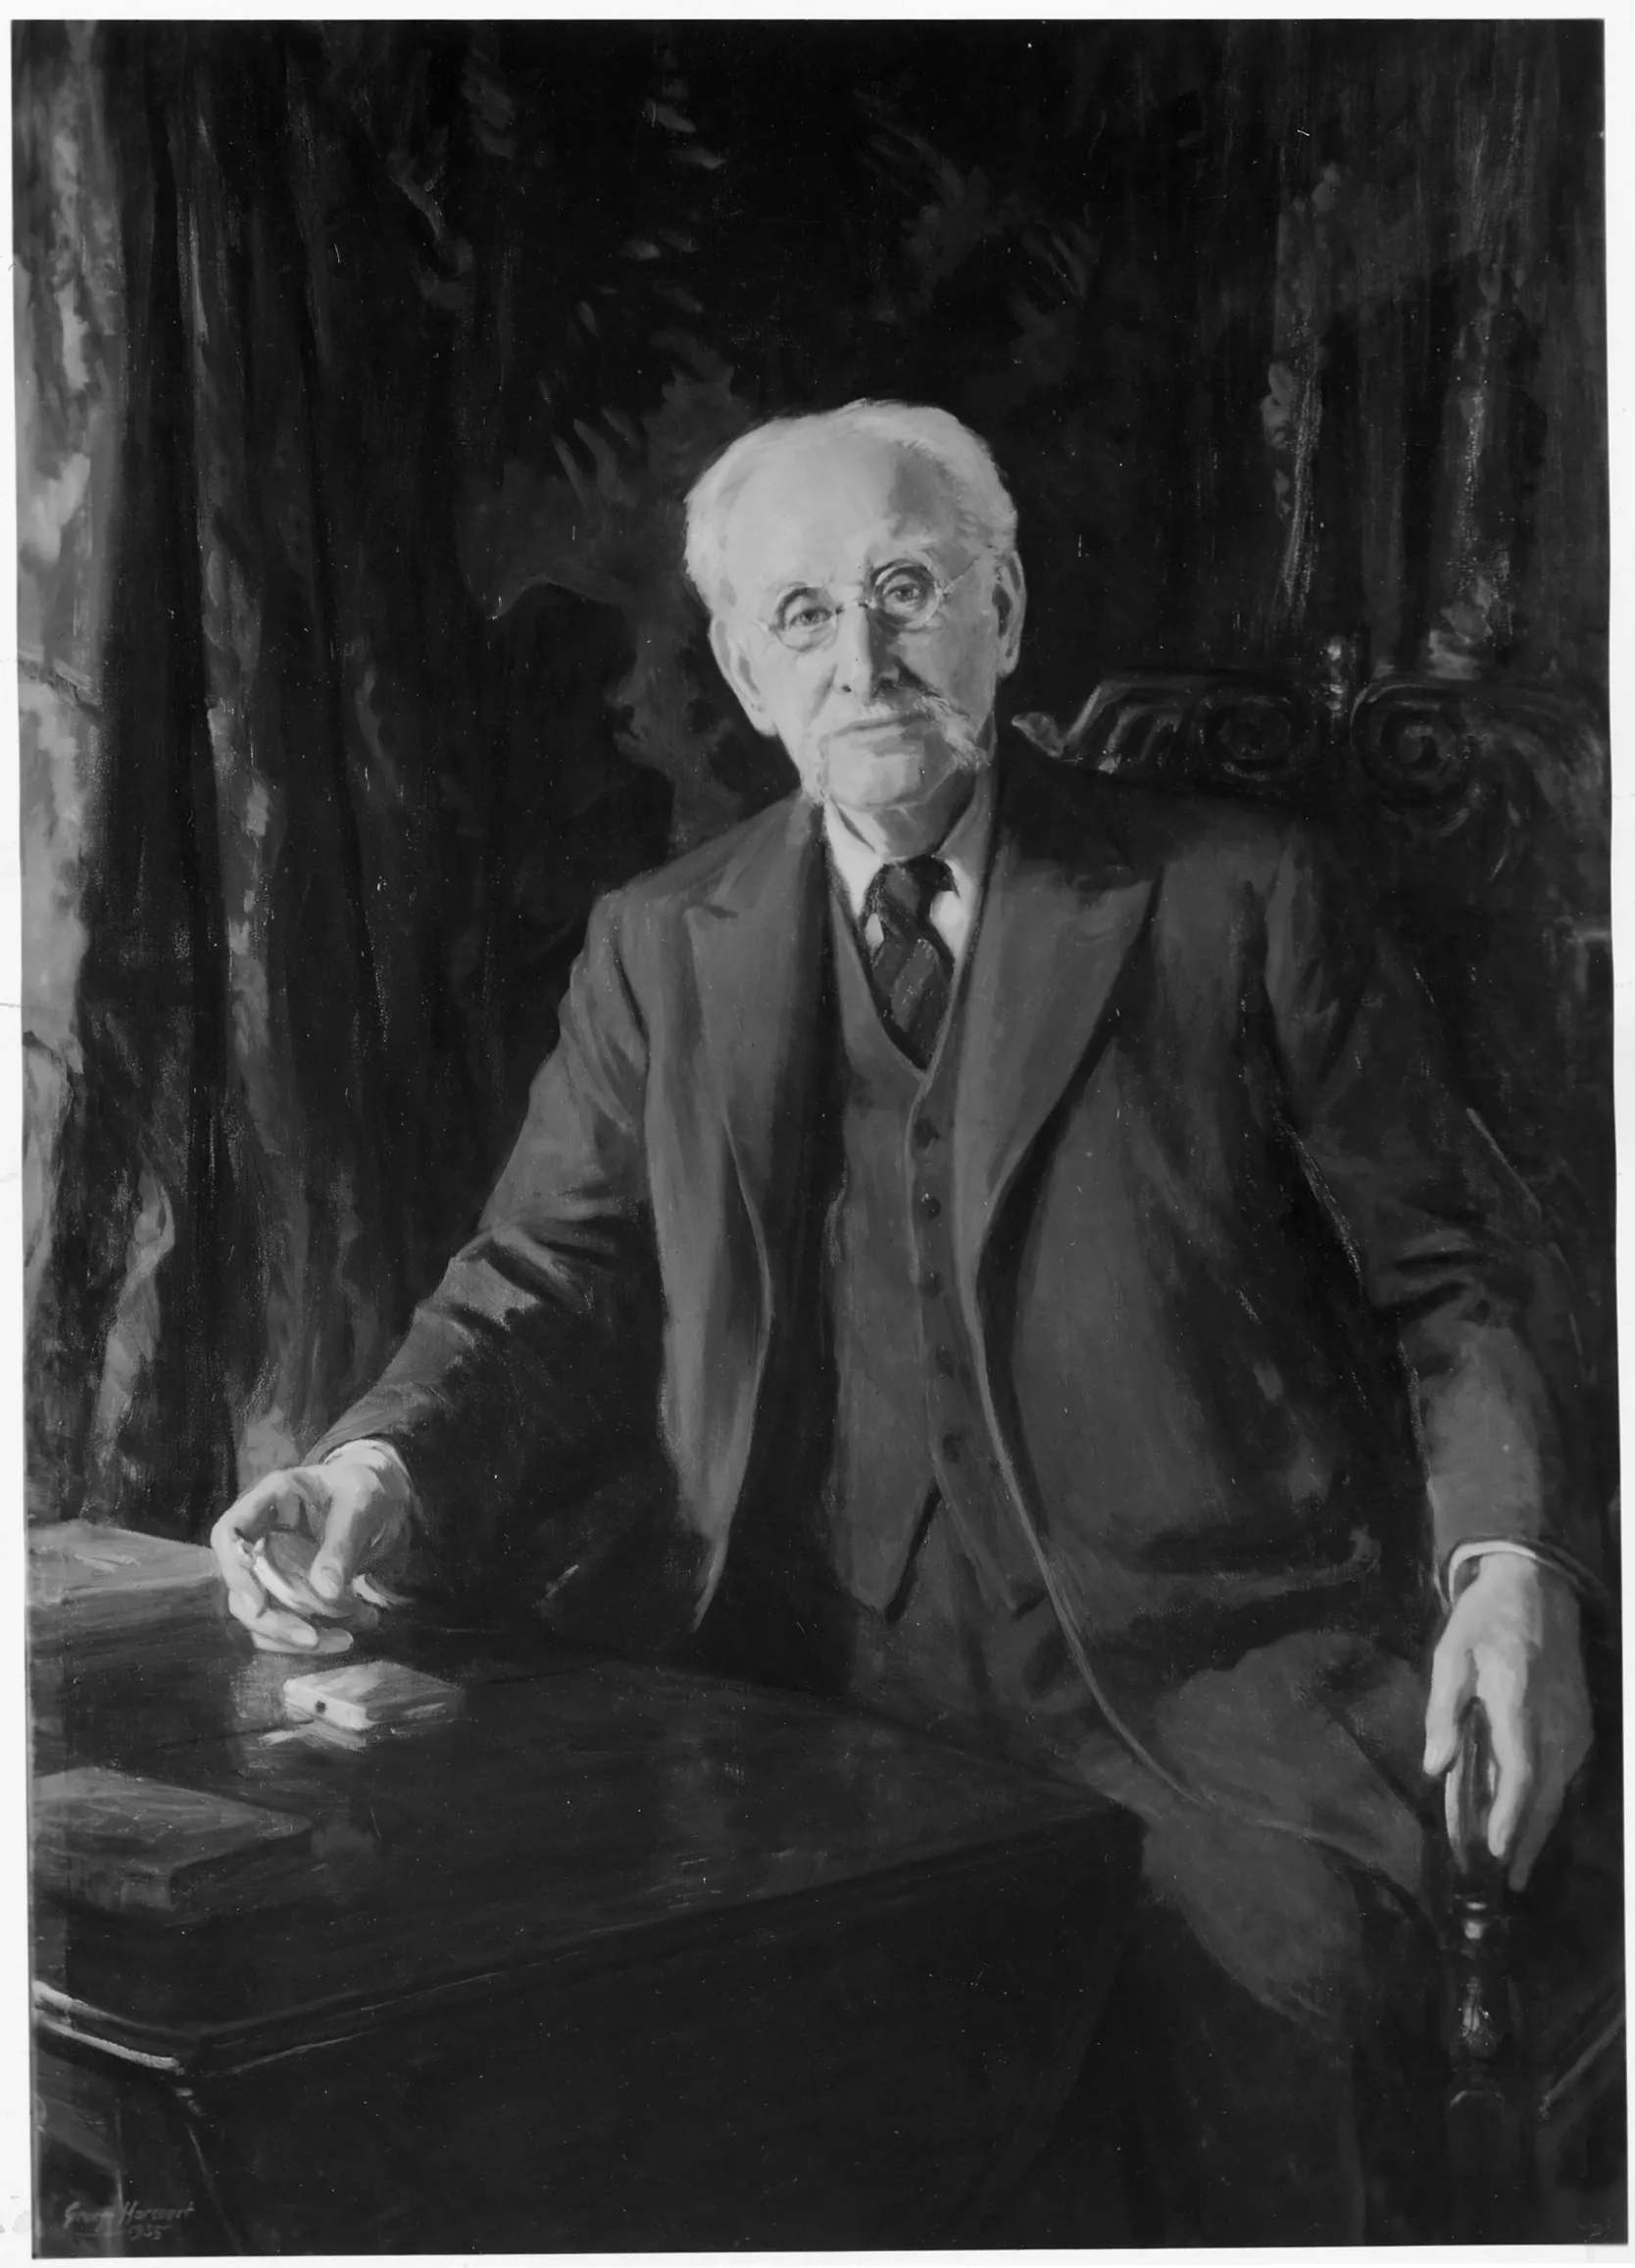 Photograph of a portrait of Colonel R E B Crompton as an older man seated at a desk, original portrait by G Harcourt.man,